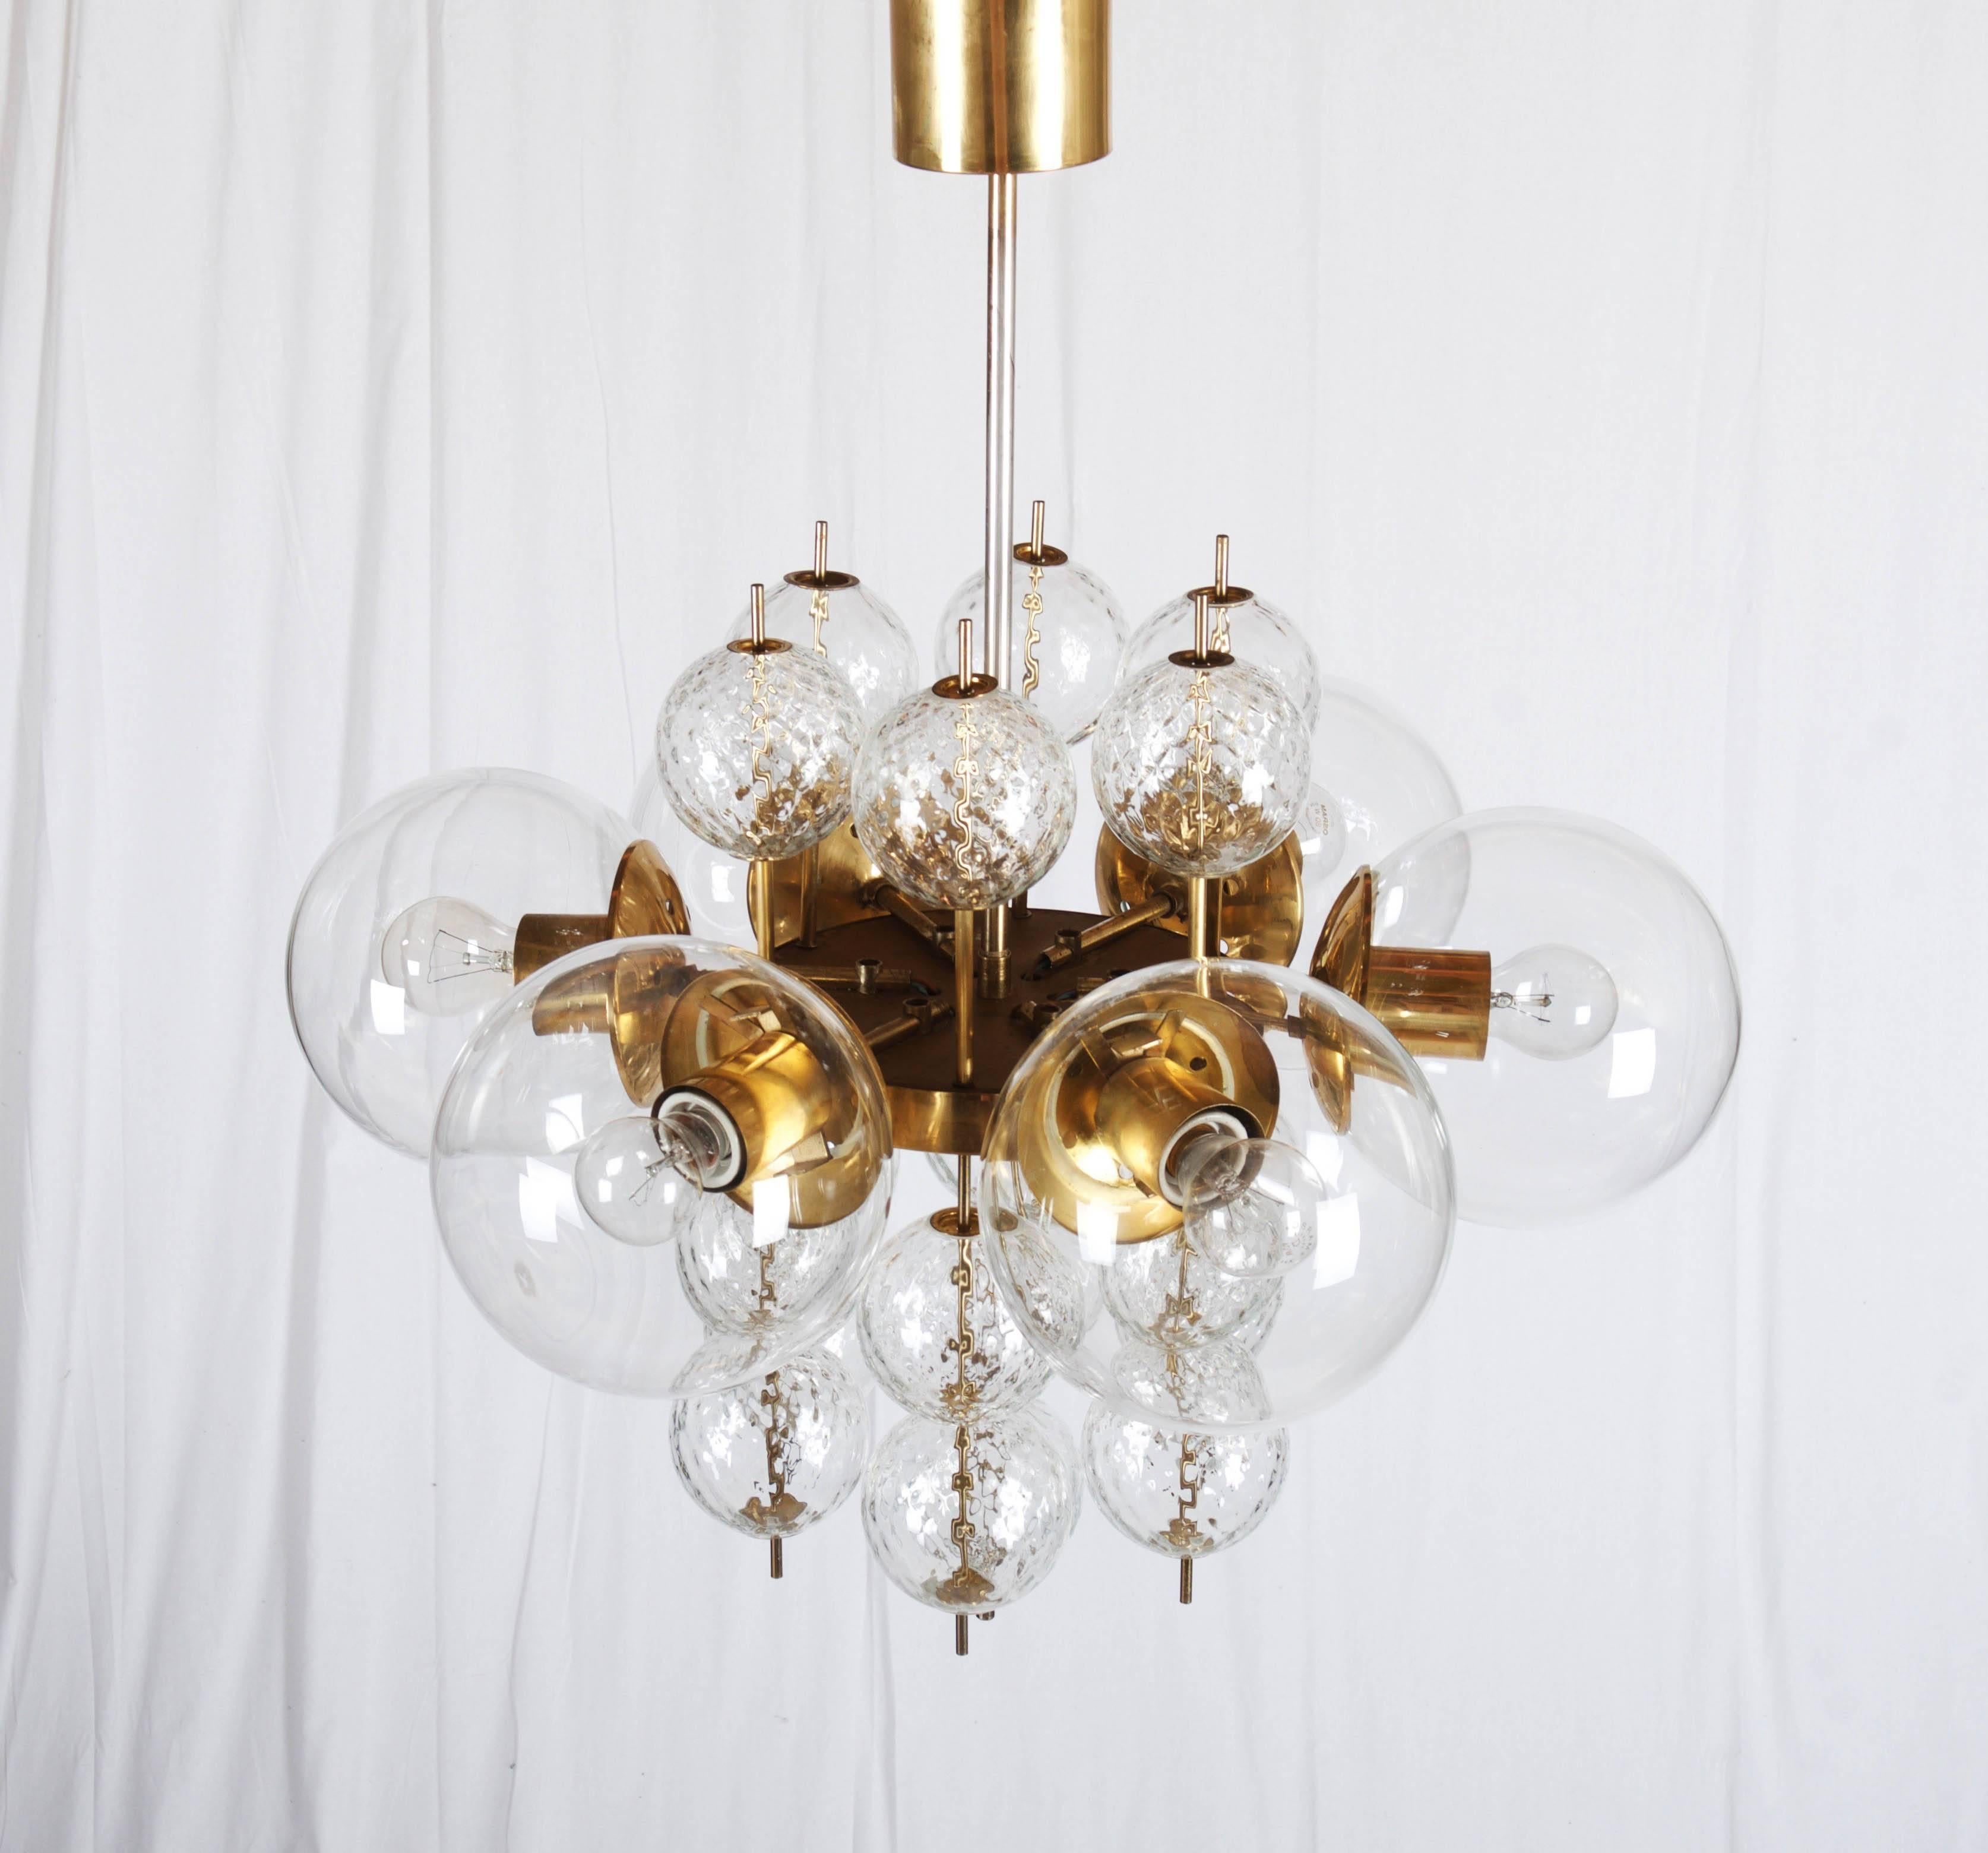 Beautiful large brass chandelier with six large and 19 structured small handblown crystal balls globes.
This chandelier was made by Kamenicky Senov in Czech Republic in the 1960s.
Perfect original condition with patina on brass parts.
two pieces